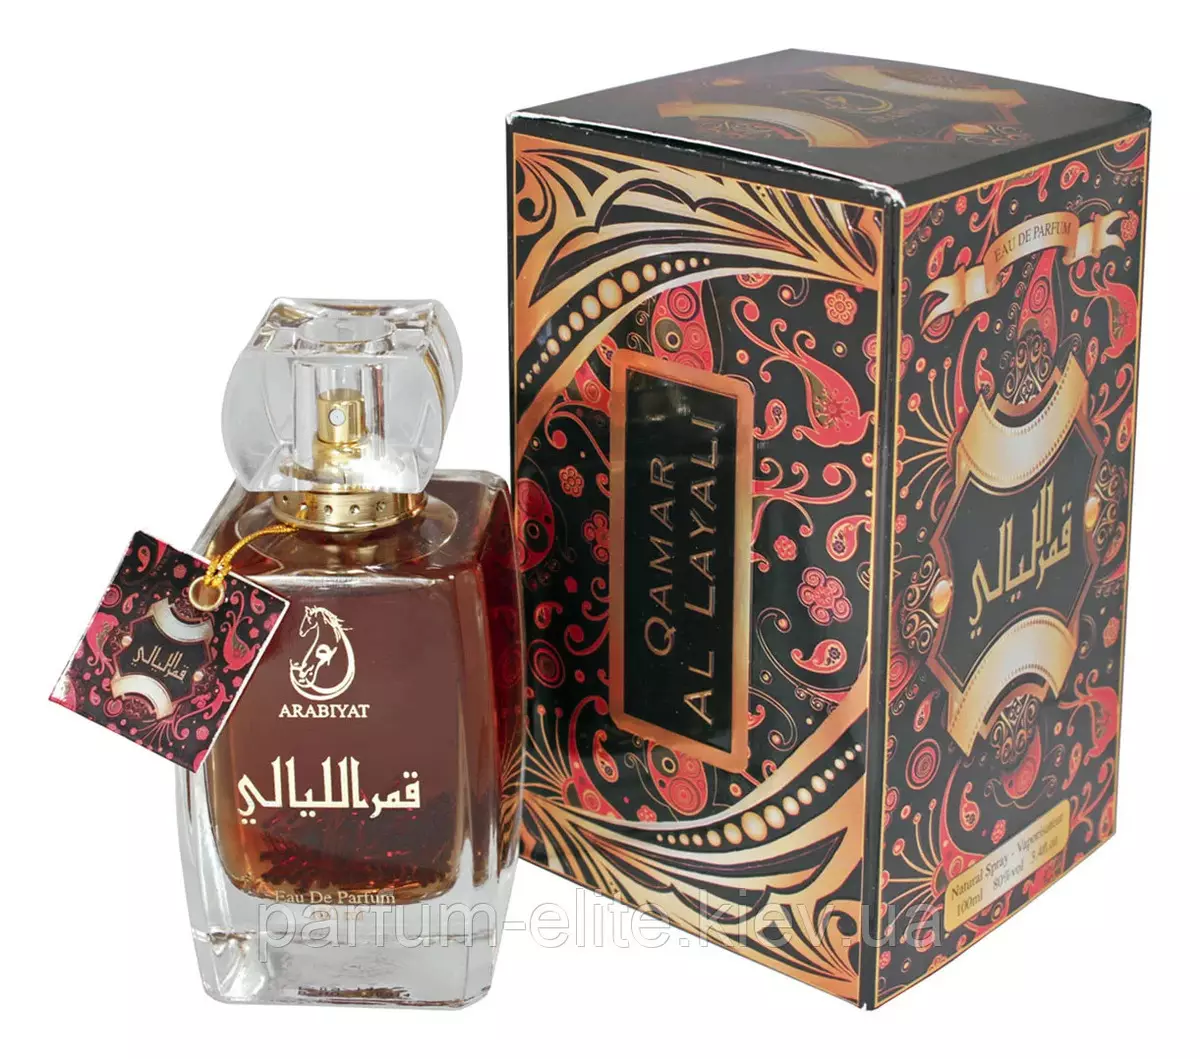 Turkish perfumes: perfume and cologne, colonid, toilet water and other perfumes from Turkey, overview of fragrances for men and women 23398_11